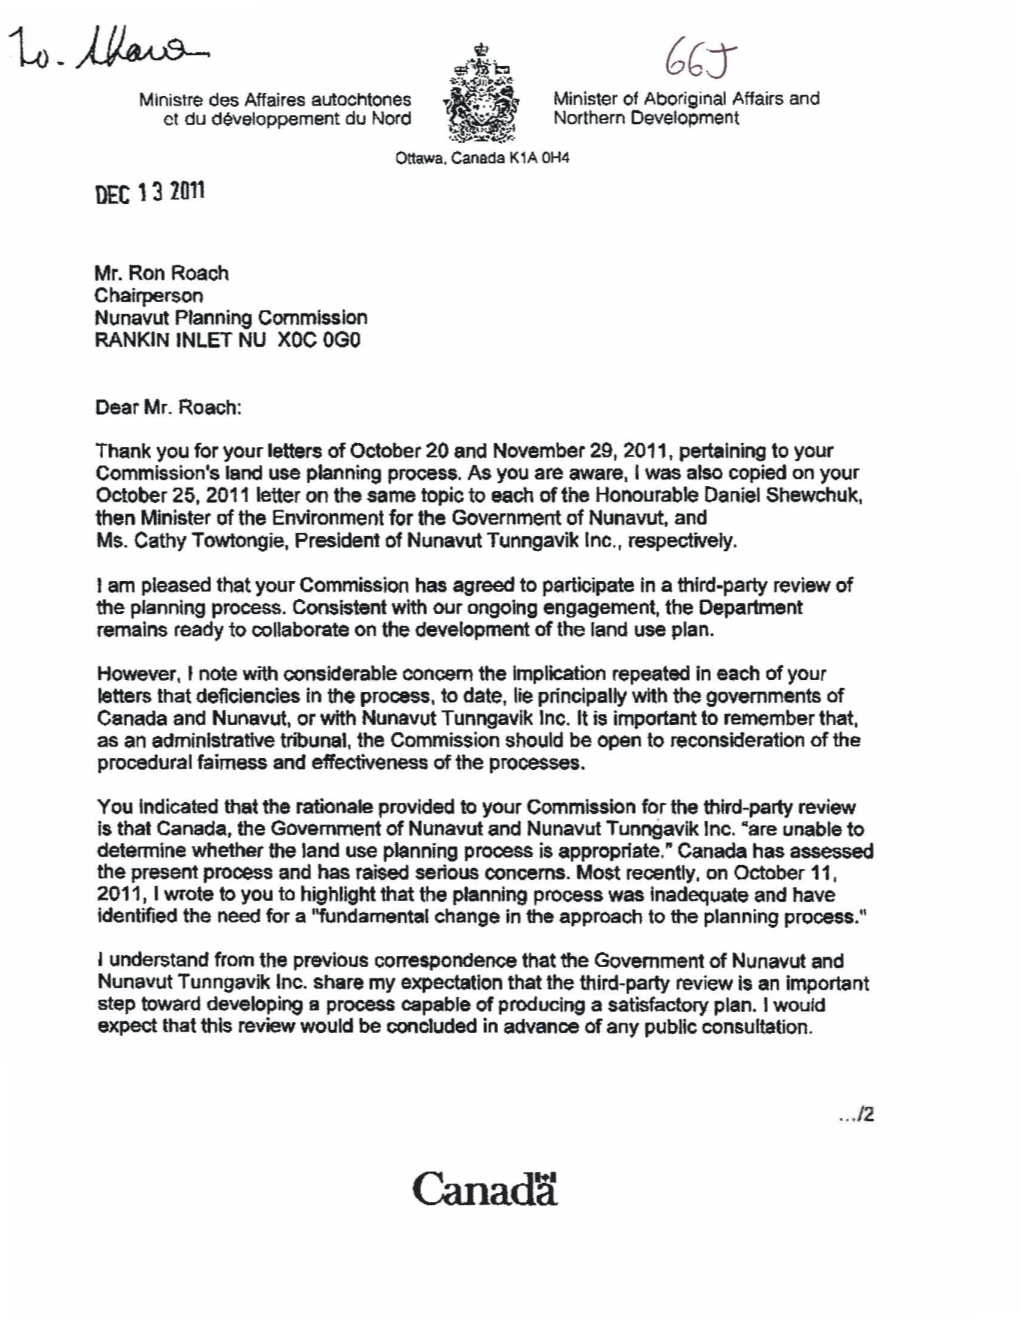 10-125E-2011-12-13 Letter from AANDC Minister Re Review.Pdf